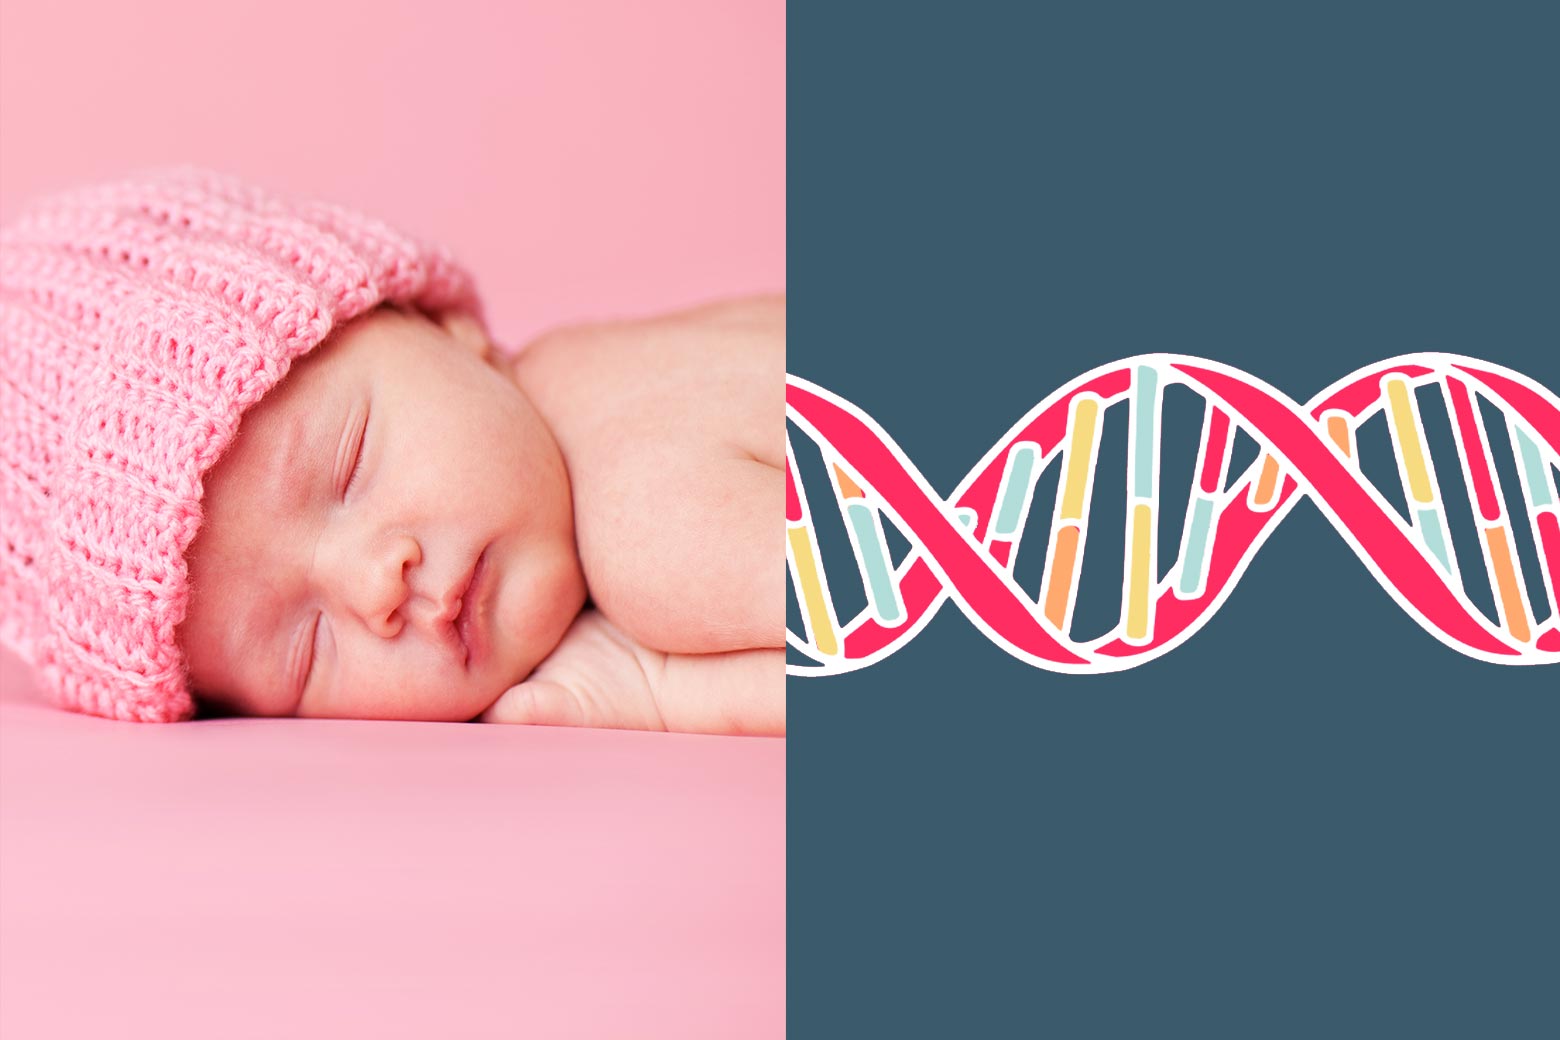 Photo of a sleeping baby wearing a pink beanie next to an illustration of a double helix